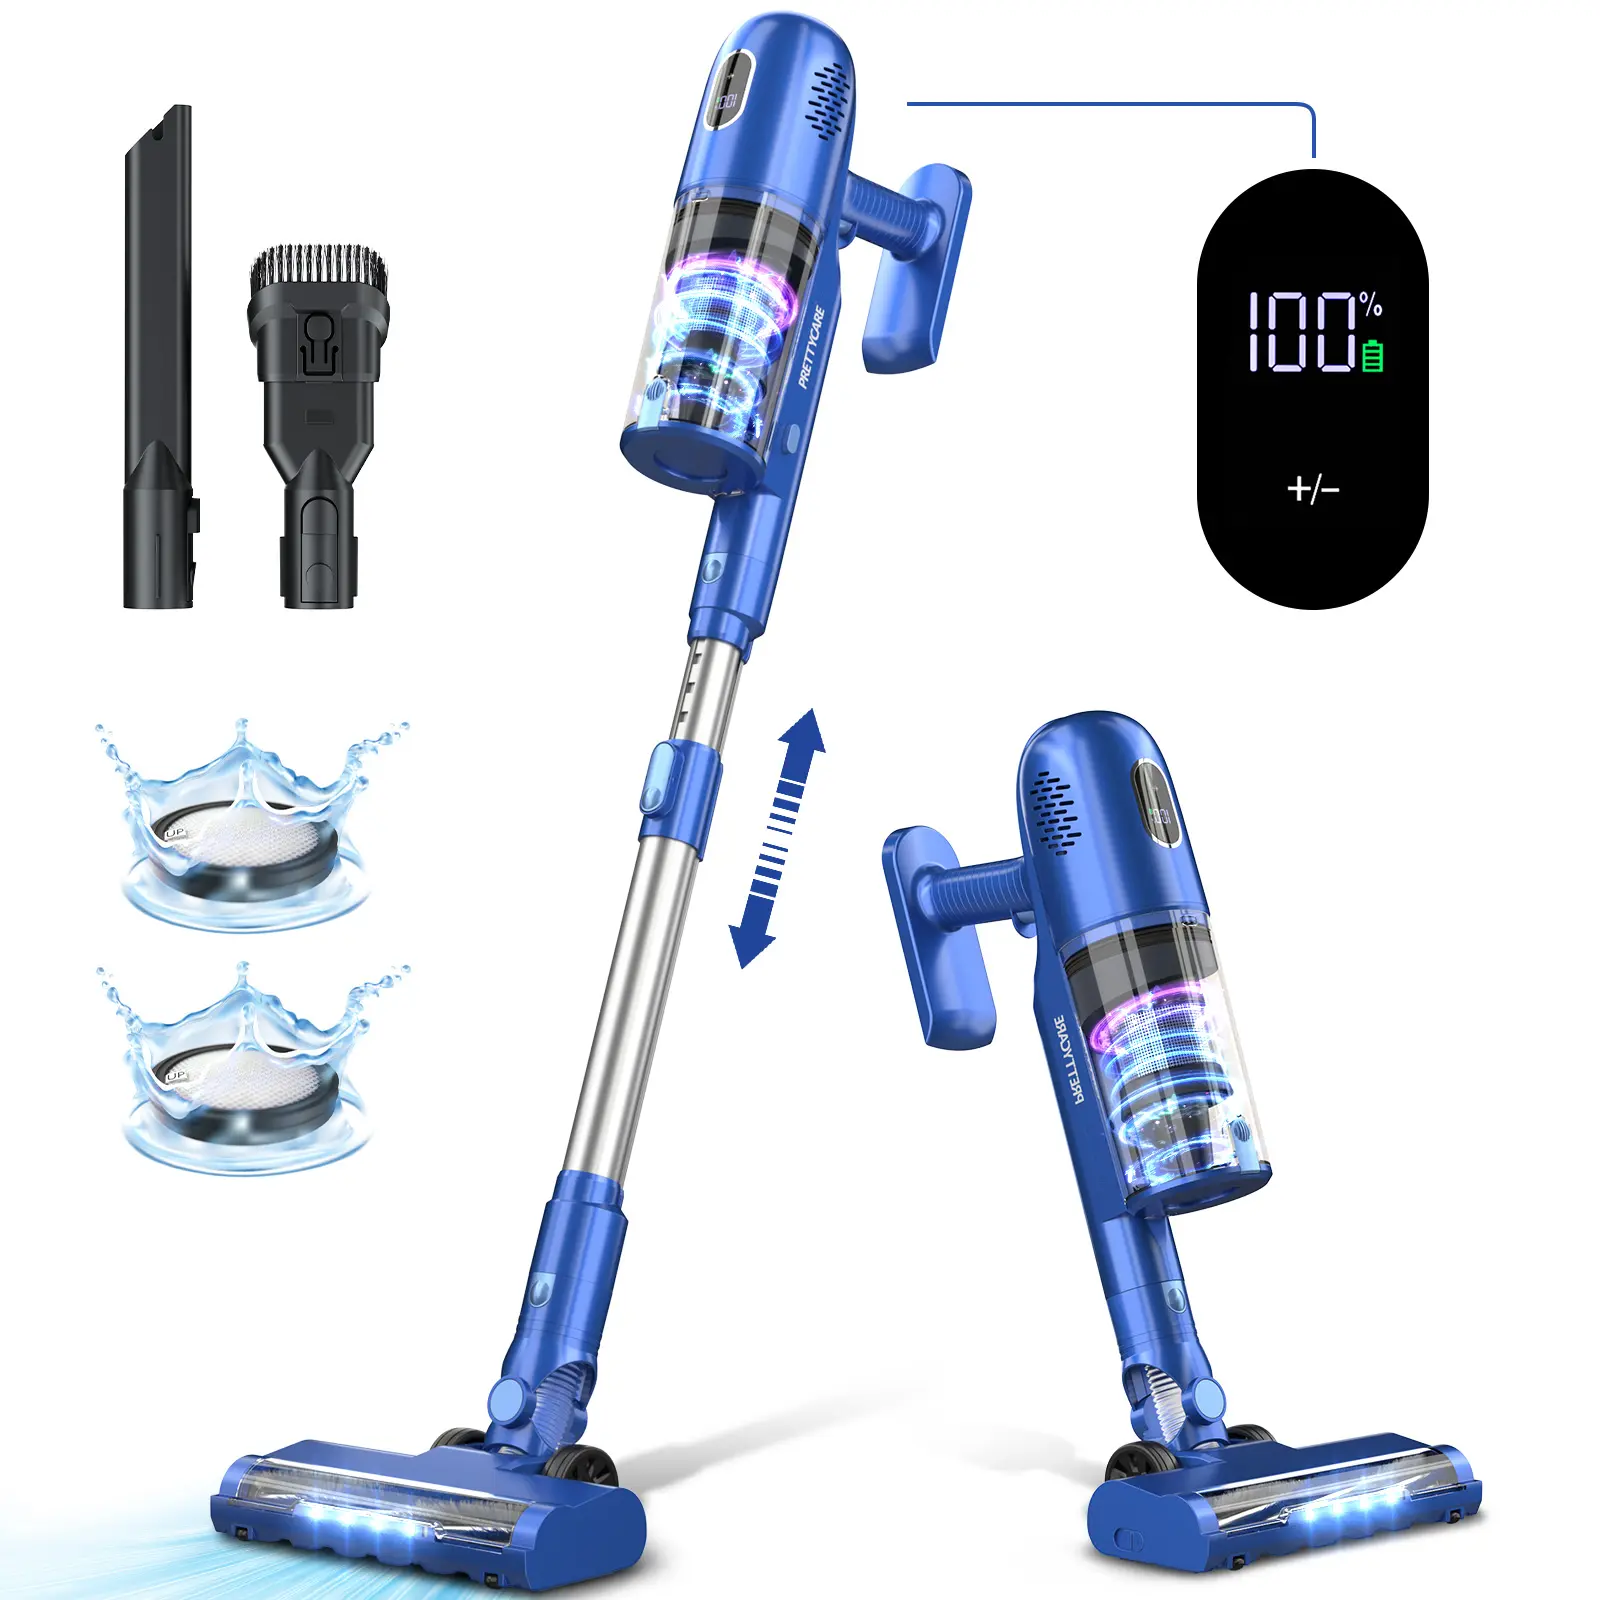 PRETTYCARE P1 Amazon Hot Sale Brand Distributor Cordless Handheld Cyclone Stick Vacuum Cleaner Floor Car Electric Cleaner